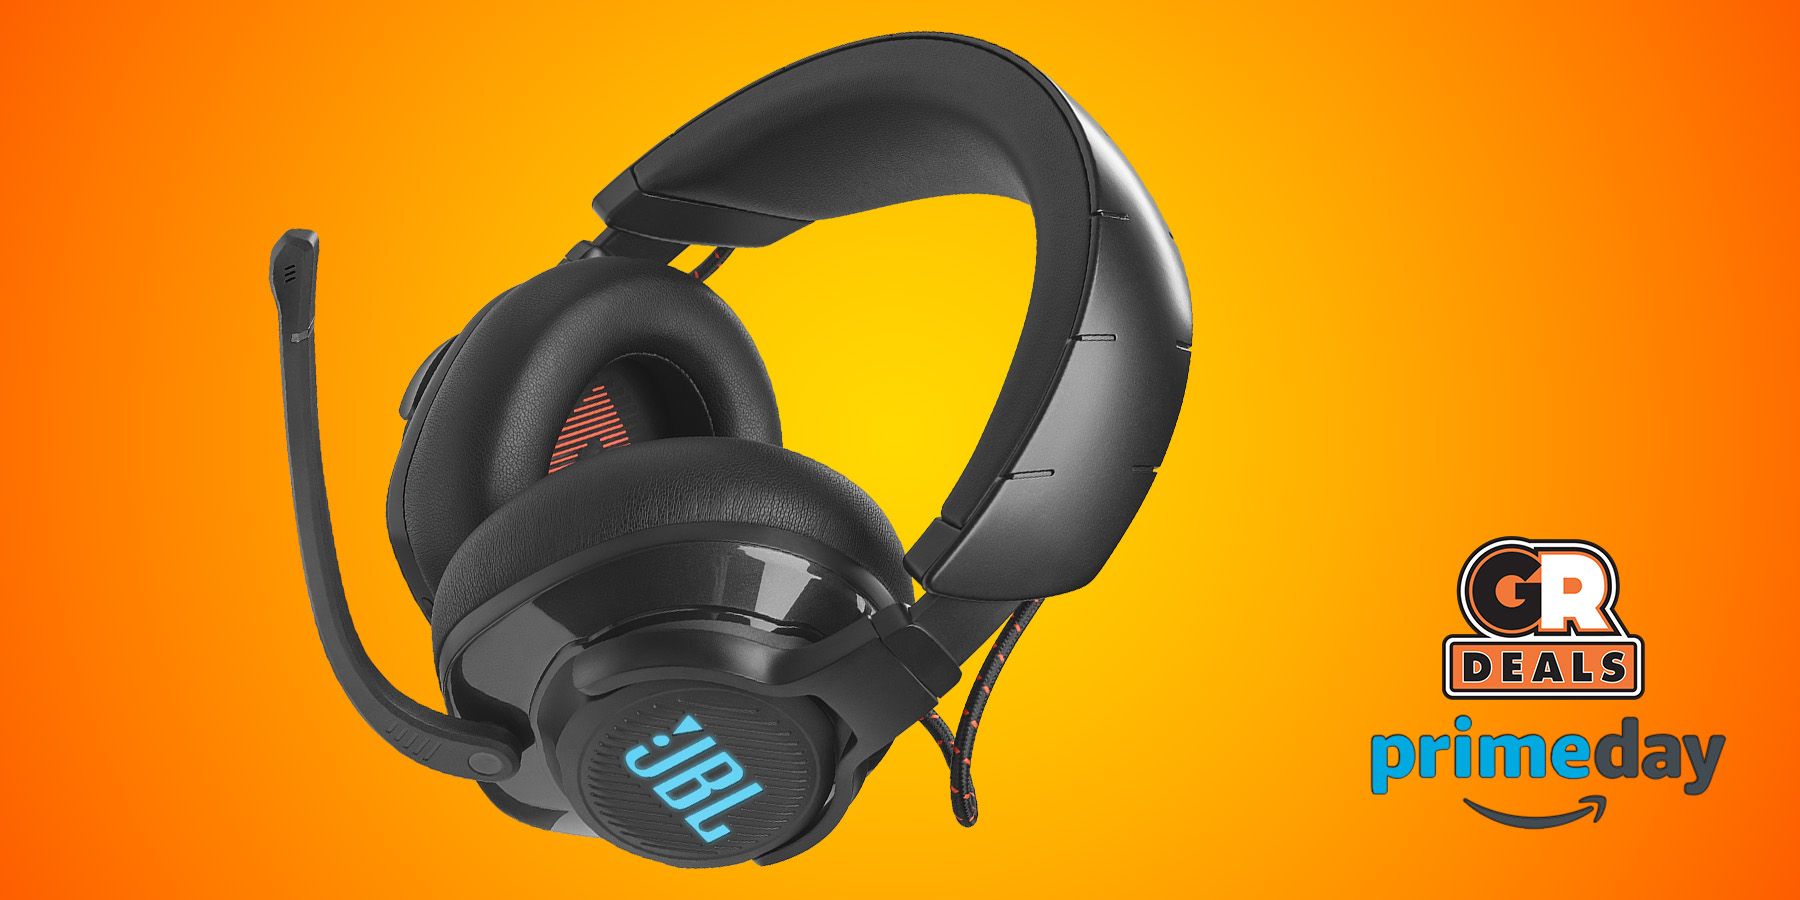 Sølv snak Ewell Unleash Your Gaming Experience with the JBL Quantum 610 Gaming Headset -  Unbelievable 33% Discount!